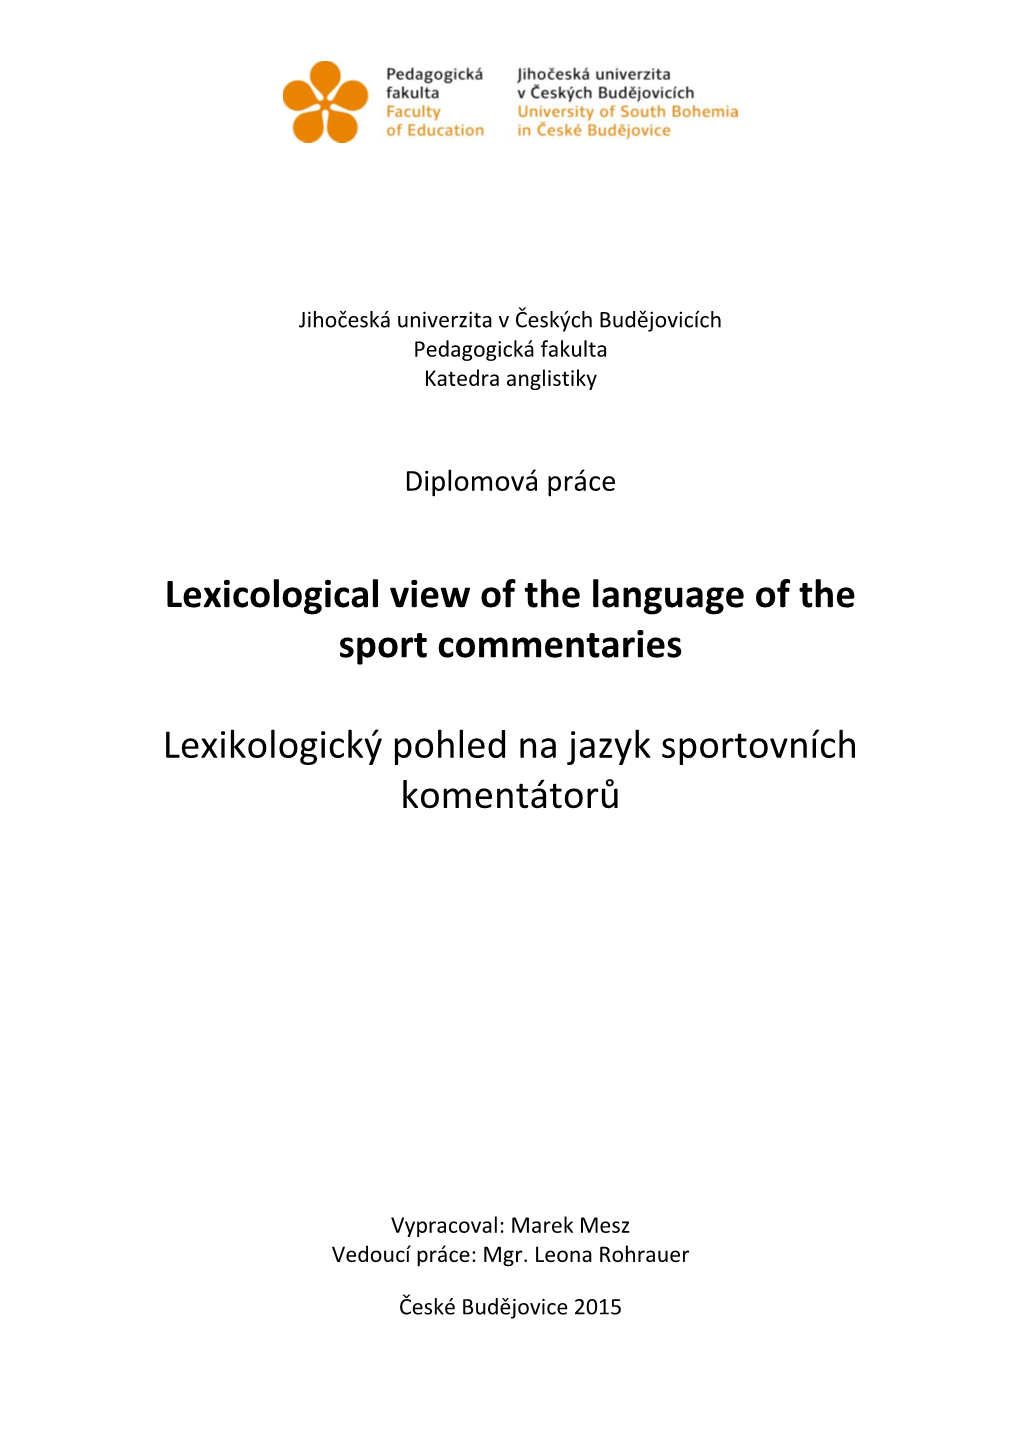 Lexicological View of the Language of the Sport Commentaries